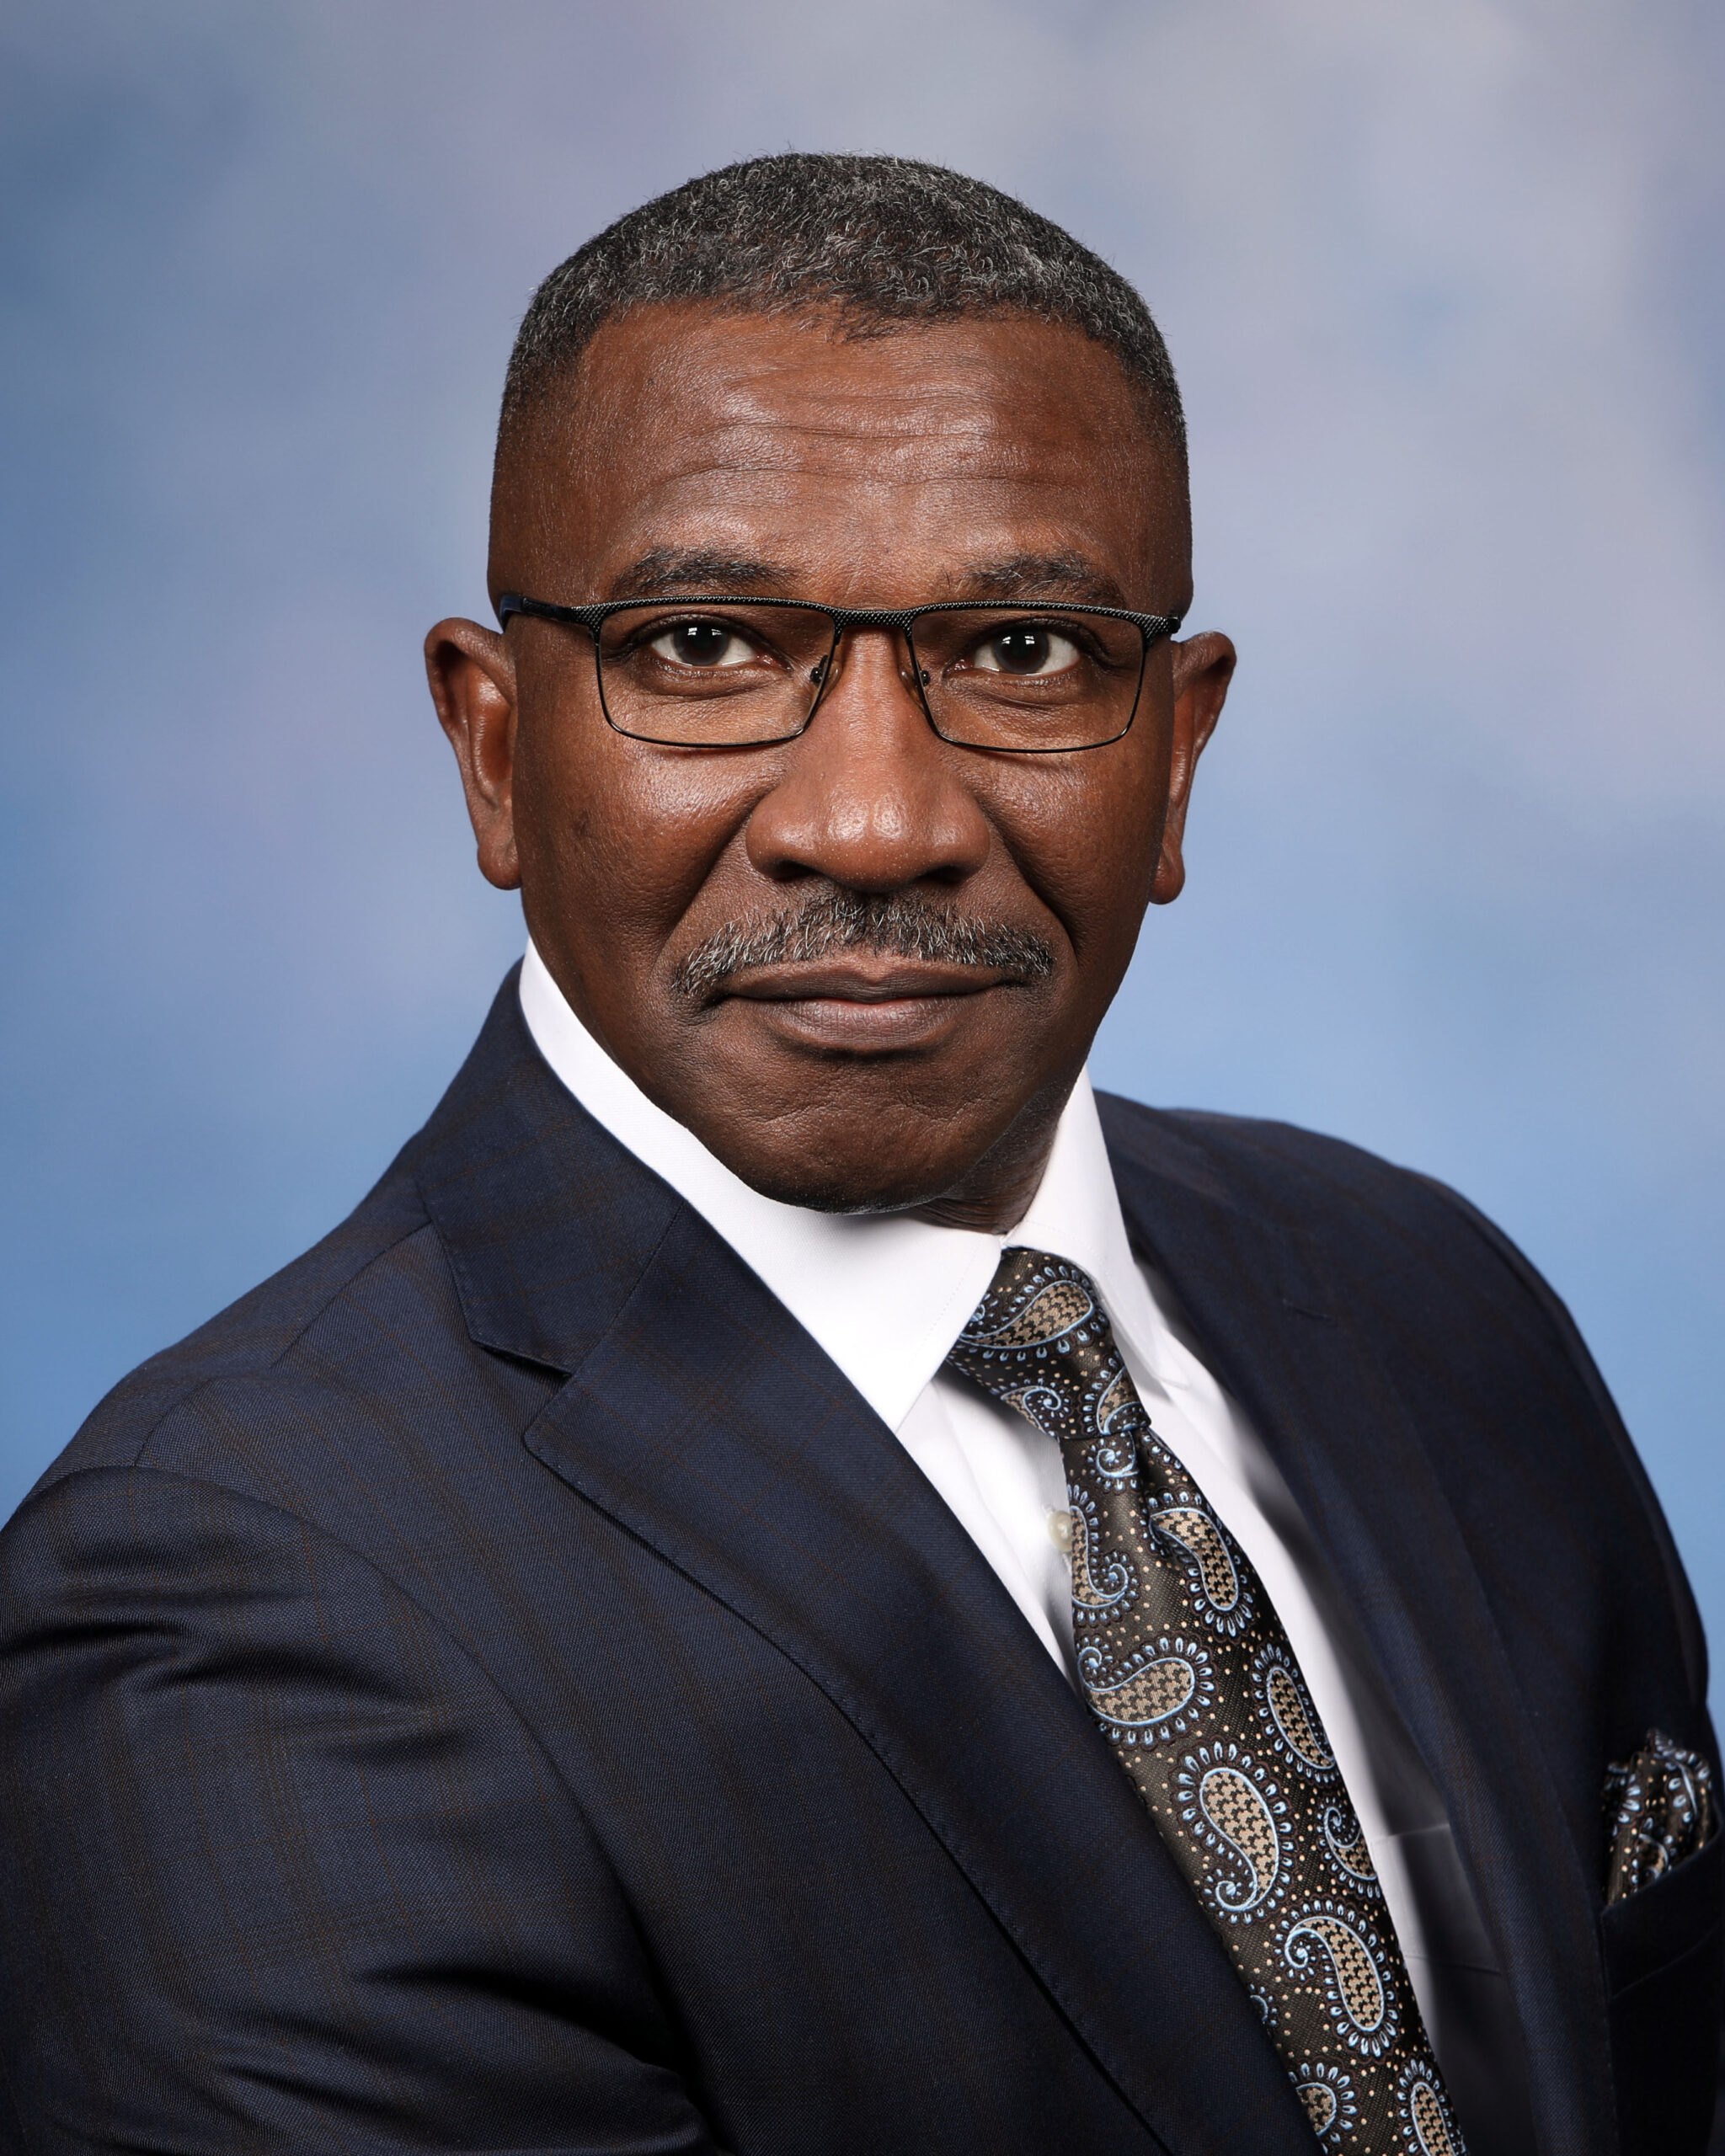 State Representative Amos O’Neal serves his second term at the House of Representatives, and is named executive vice chair for the Michigan Legislative Black Caucus.